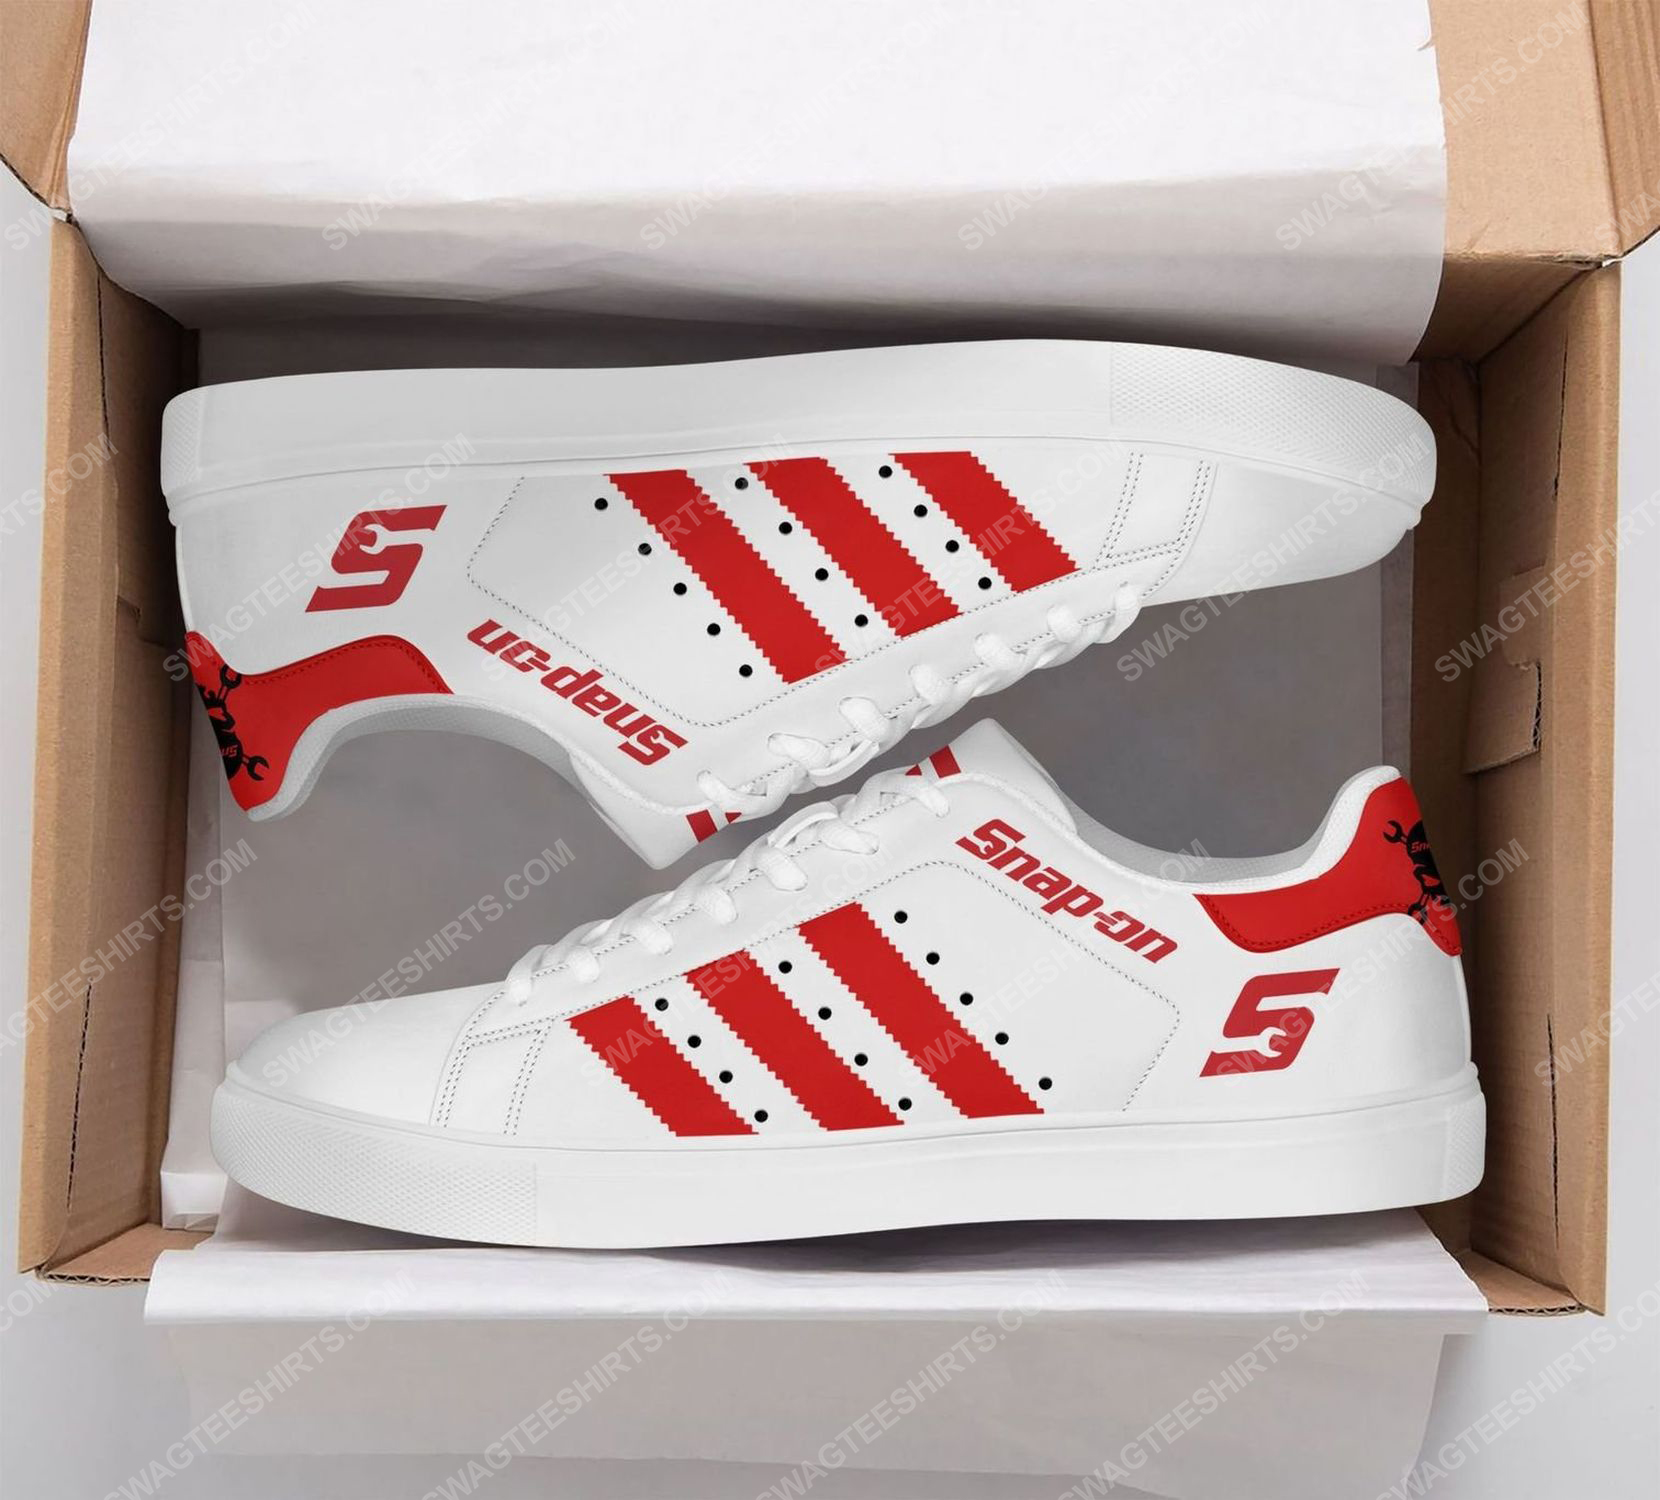 The snap-on version red stan smith shoes 2